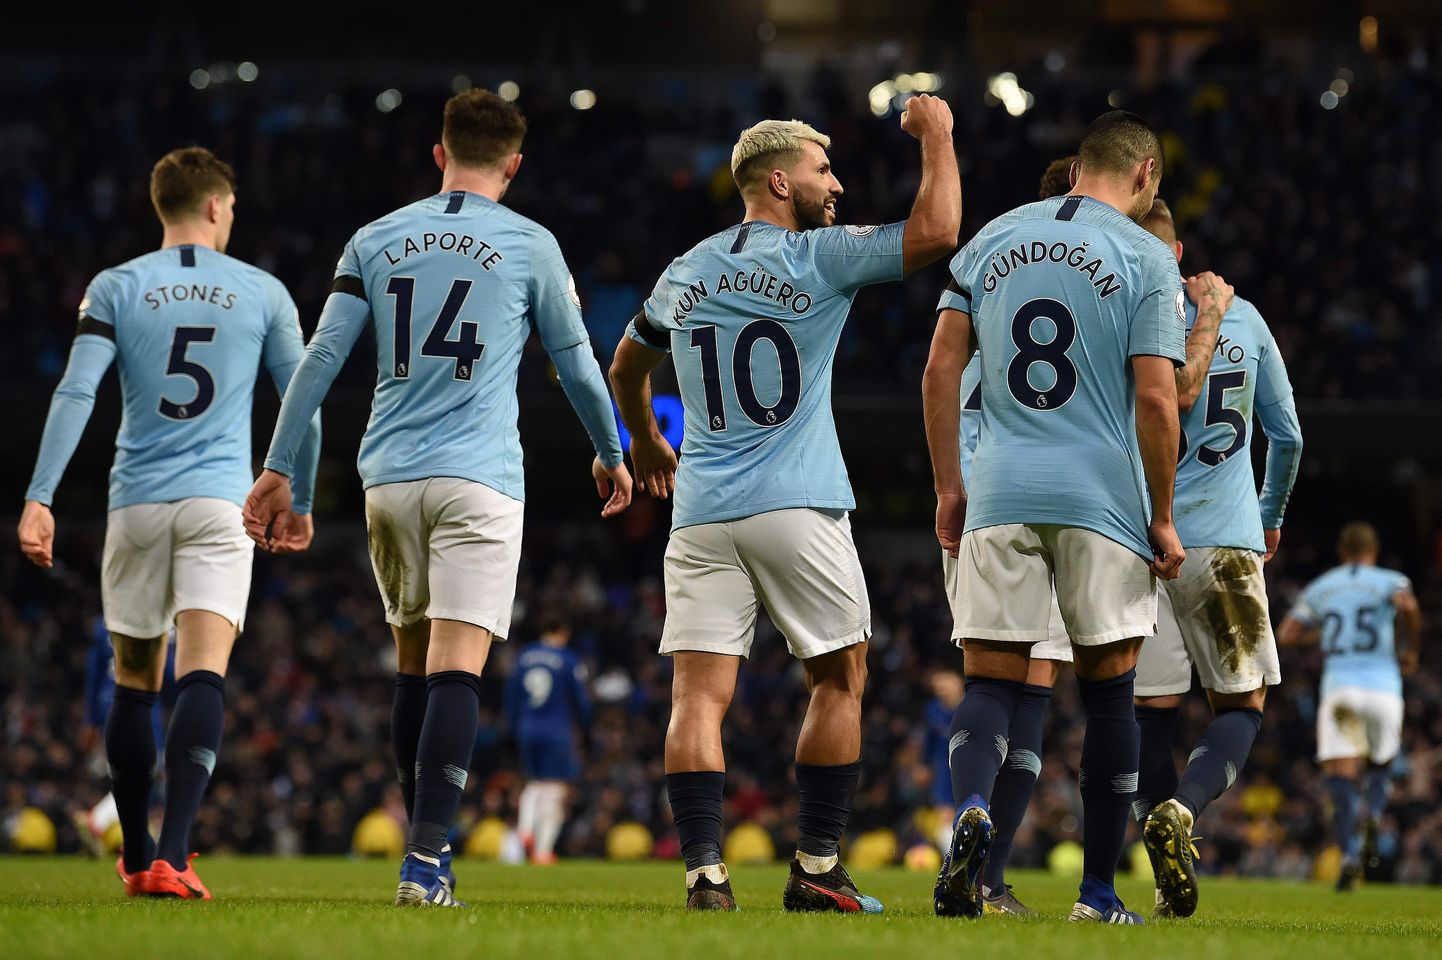 Manchester City's Argentinian striker Sergio Aguero celebrates scoring his team's fifth goal, his third, from the penalty spot during the English Premier League football match between Manchester City and Burnley at the Etihad Stadium in Manchester, north west England, on February 10, 2019. (Photo by Paul ELLIS / AFP) / RESTRICTED TO EDITORIAL USE. No use with unauthorized audio, video, data, fixture lists, club/league logos or 'live' services. Online in-match use limited to 120 images. An additional 40 images may be used in extra time. No video emulation. Social media in-match use limited to 120 images. An additional 40 images may be used in extra time. No use in betting publications, games or single club/league/player publications. /